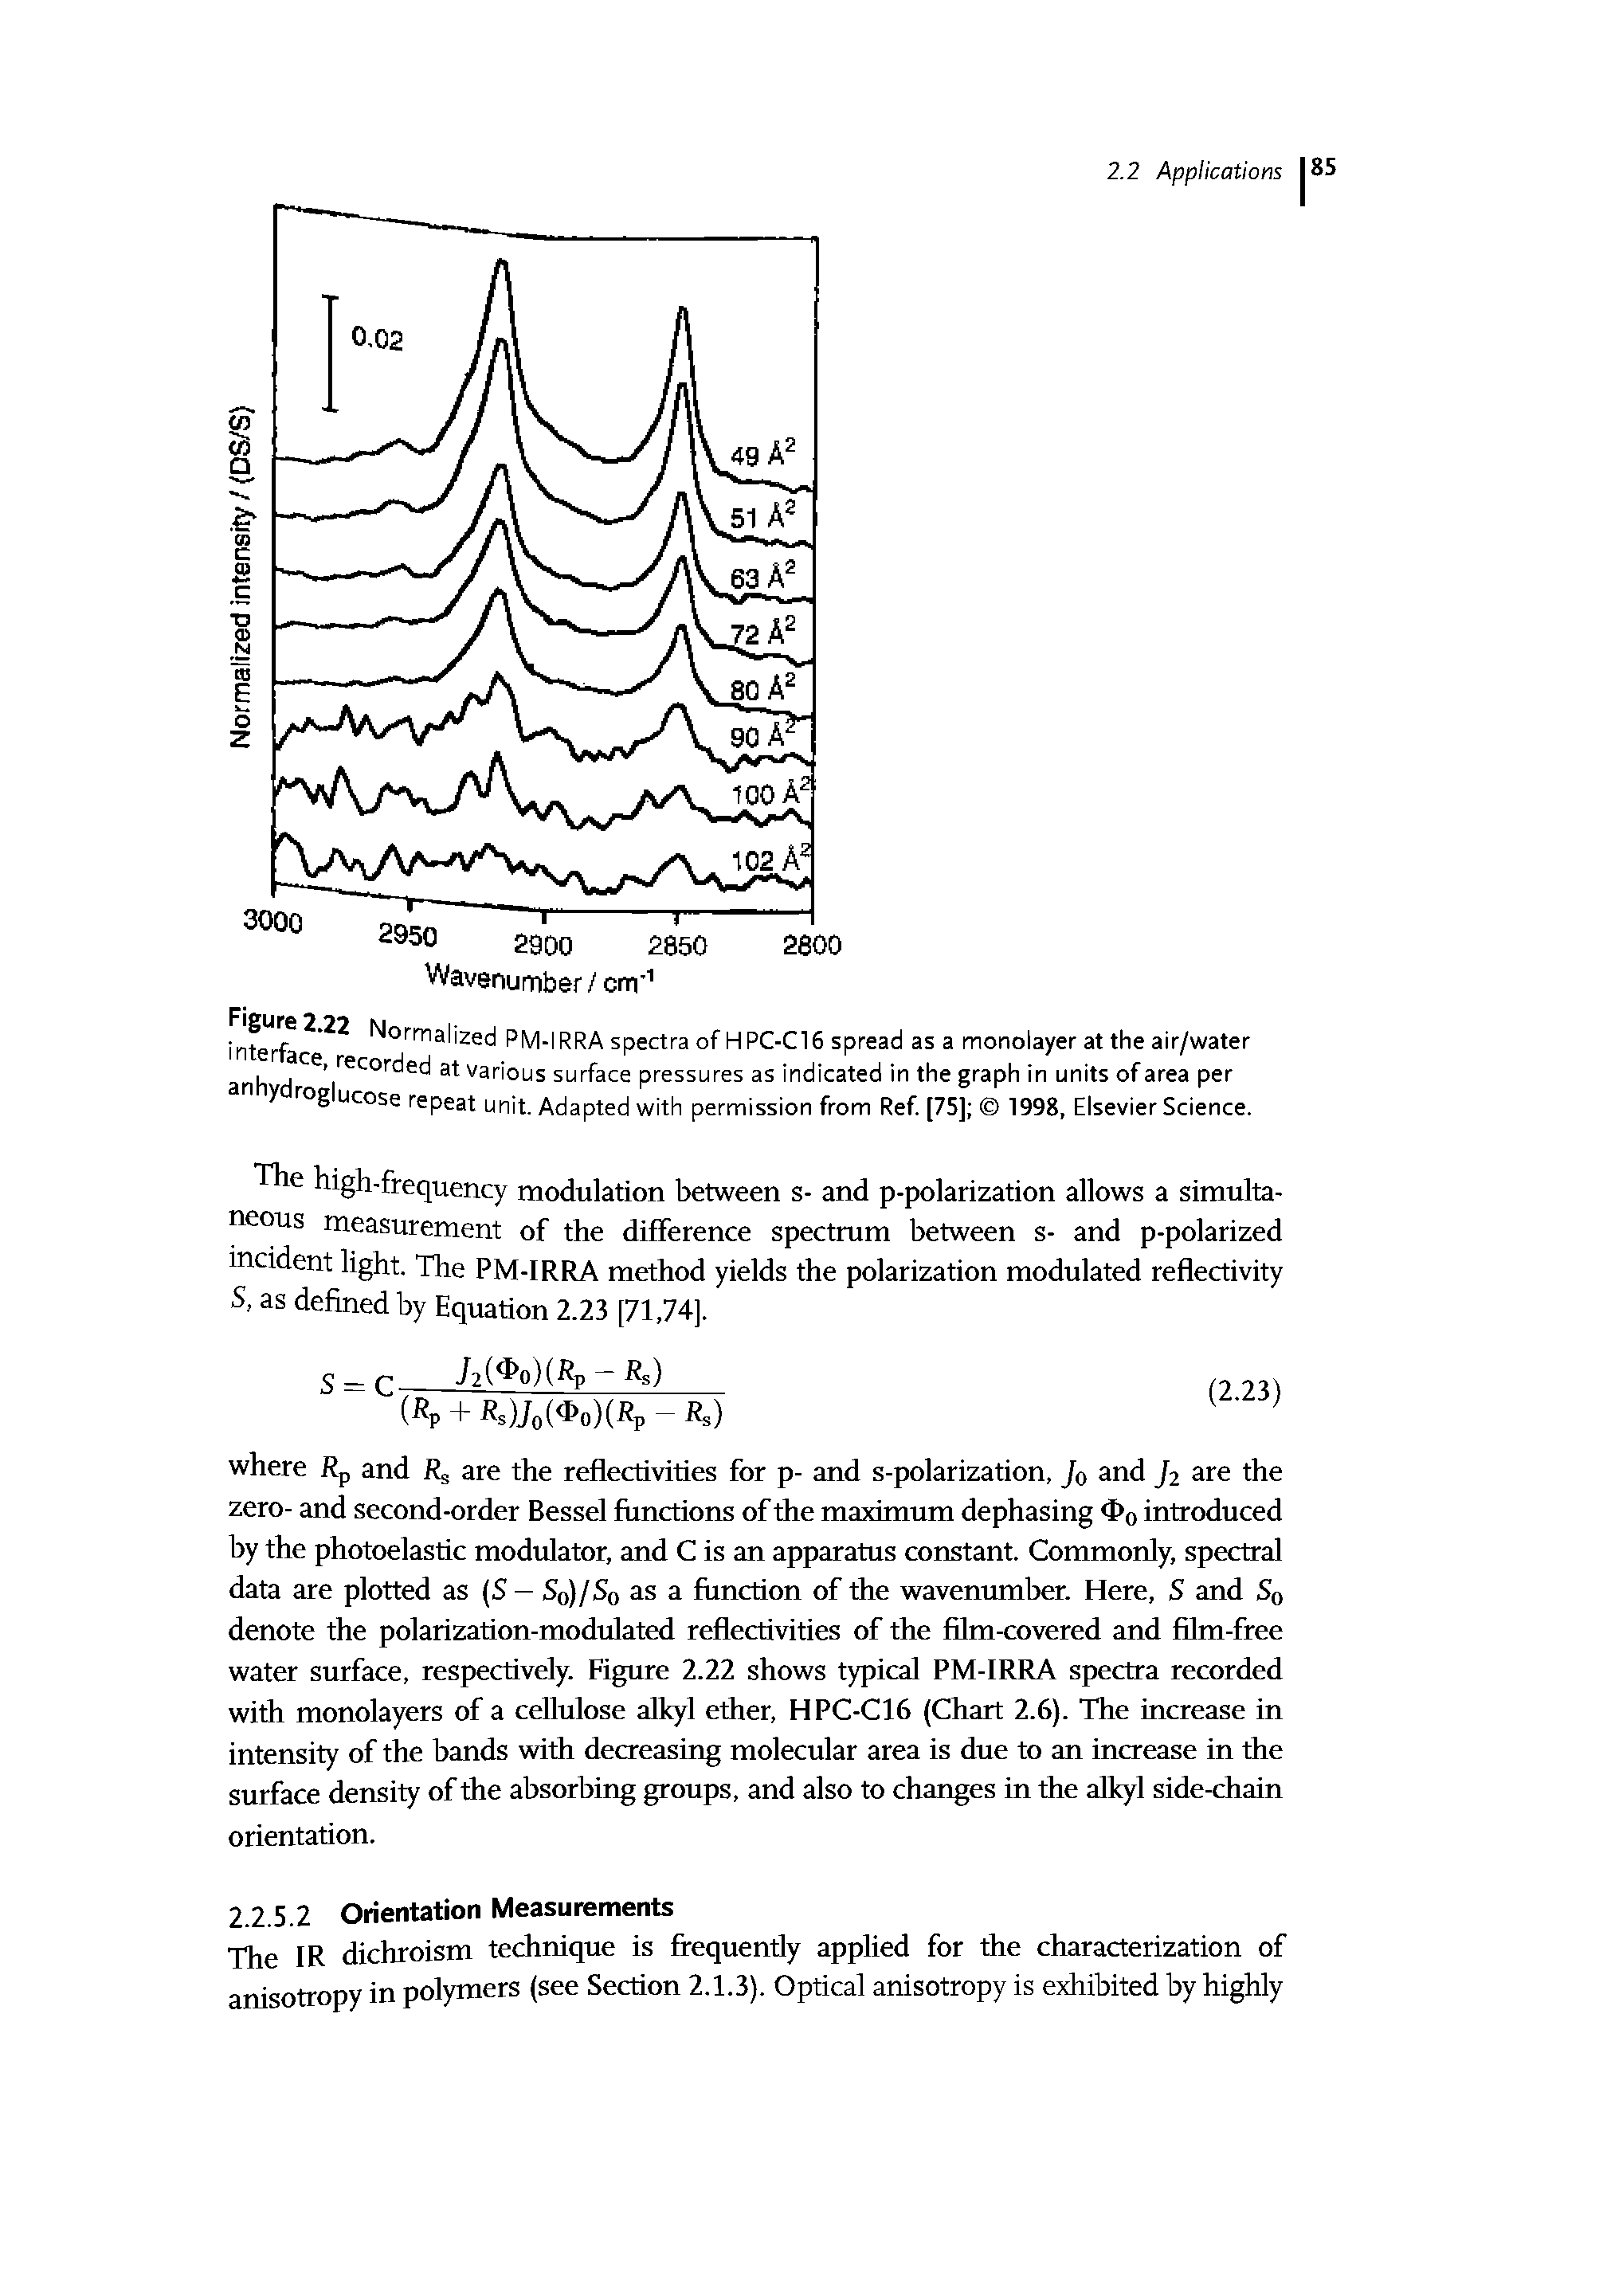 Figure 2.22 Normalized PM-IRRA spectra of HPC-C16 spread as a monolayer at the air/water interface, recorded at various surface pressures as indicated in the graph in units of area per anhydroglucose repeat unit. Adapted with permission from Ref [75] 1998, Elsevier Science.